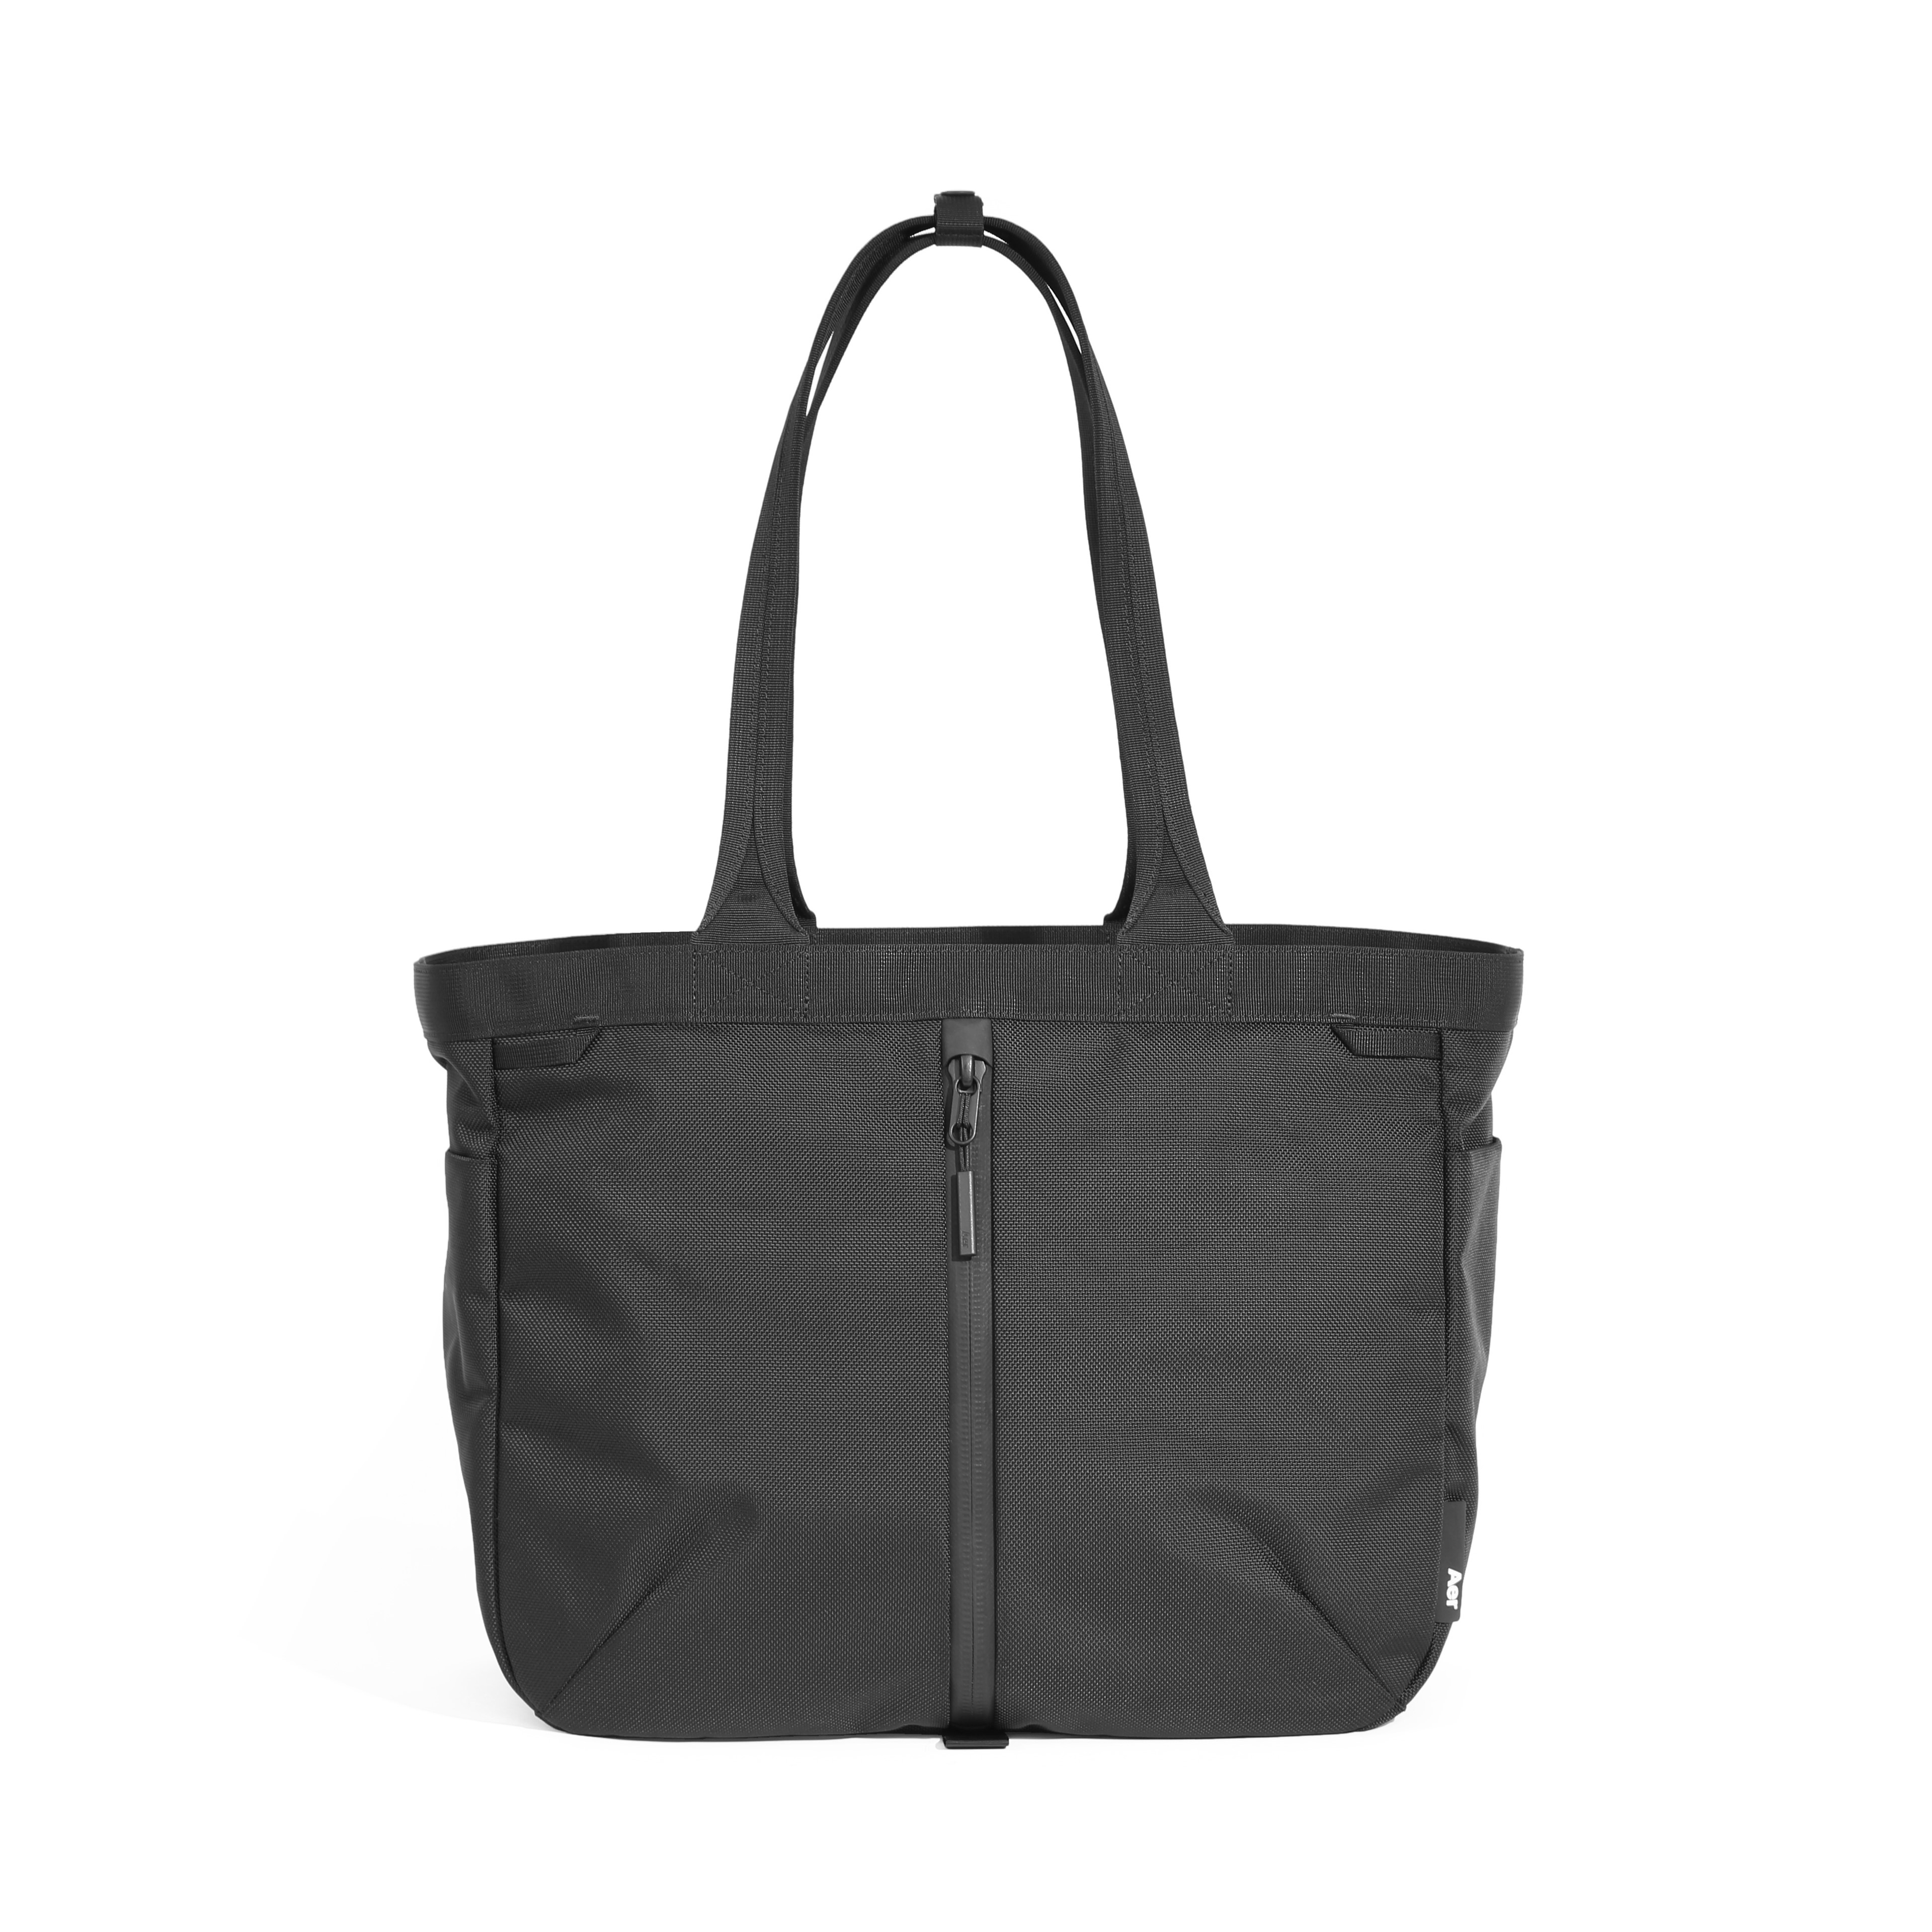 City Tote Black | Aer ｜ エアー公式通販サイト